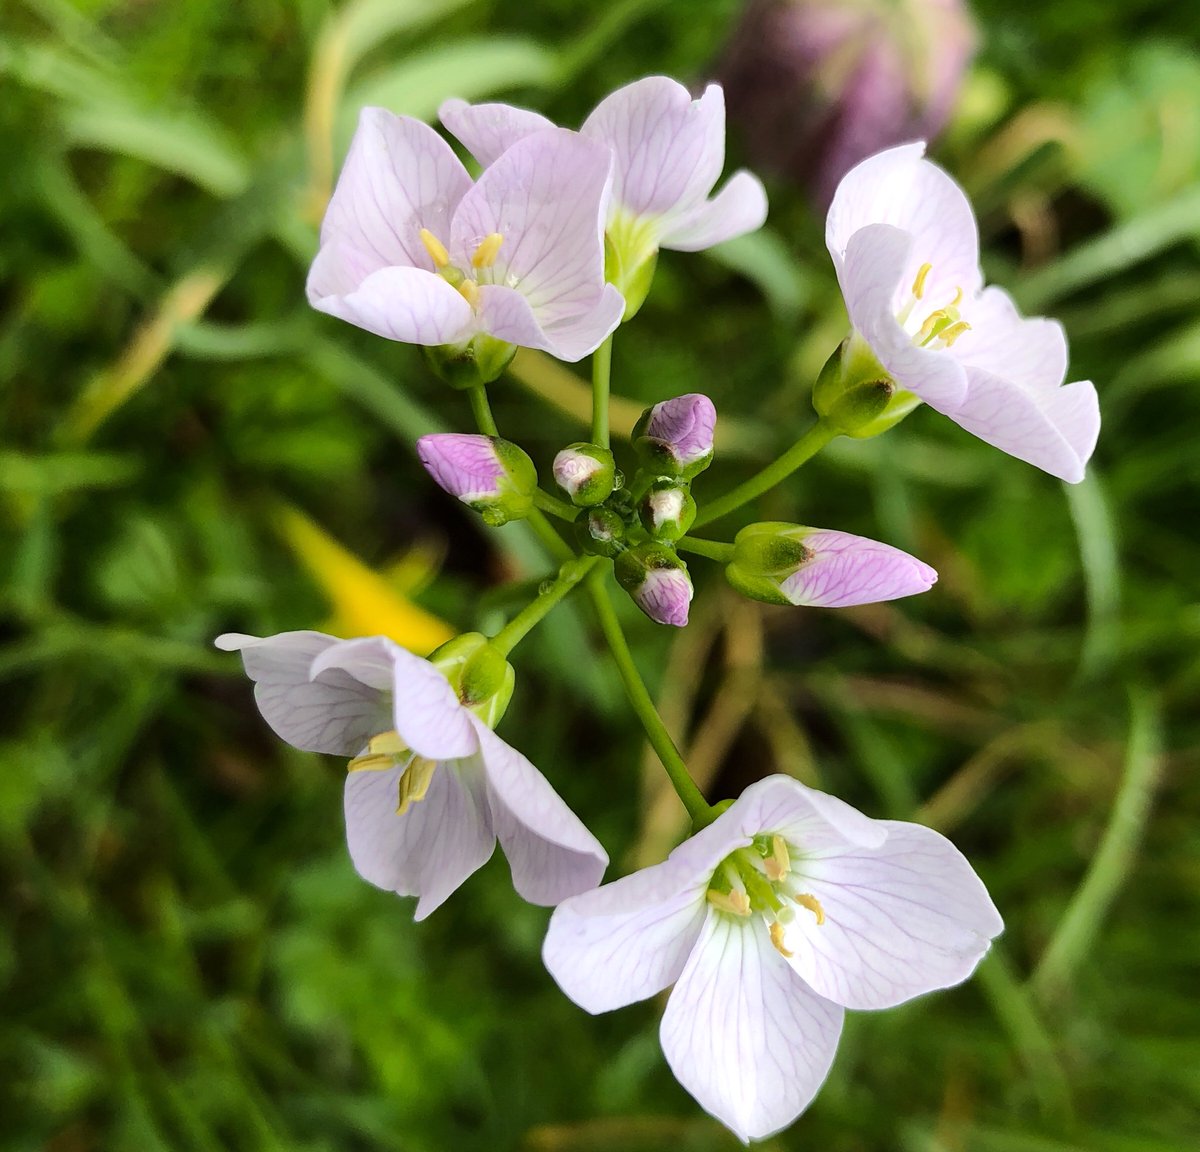 #wildflowerhour it’s everywhere right now  #ladyssmock or #cuckooflower to others